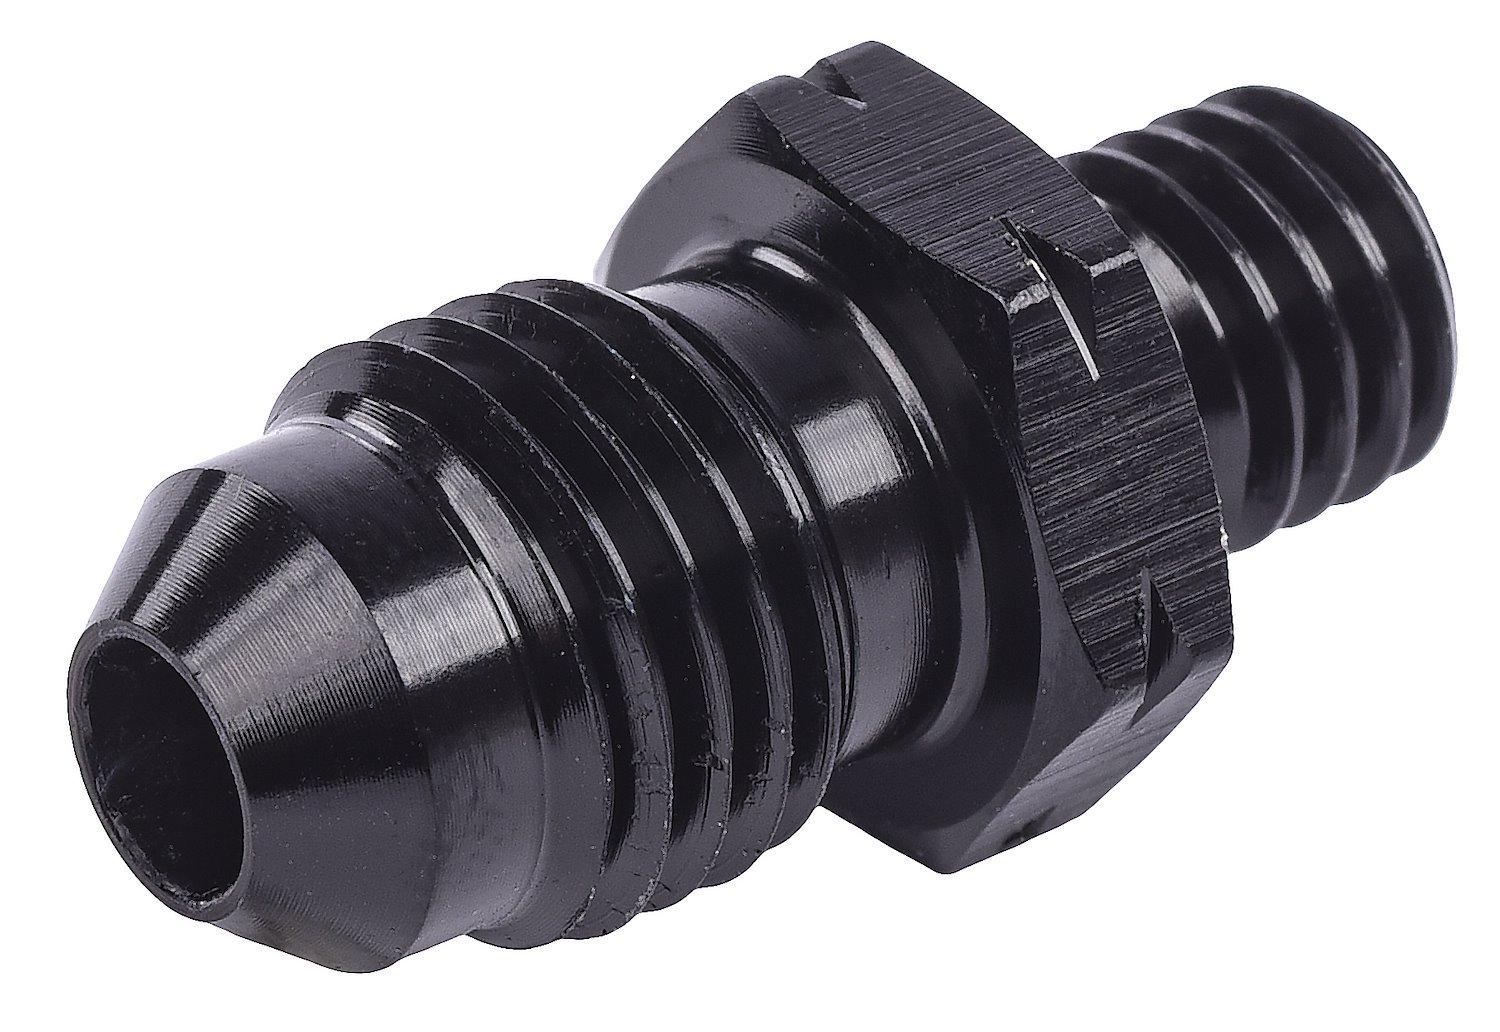 AN to Metric Adapter Fitting [-4 AN Male to 8mm x 1.25 Male, Black]